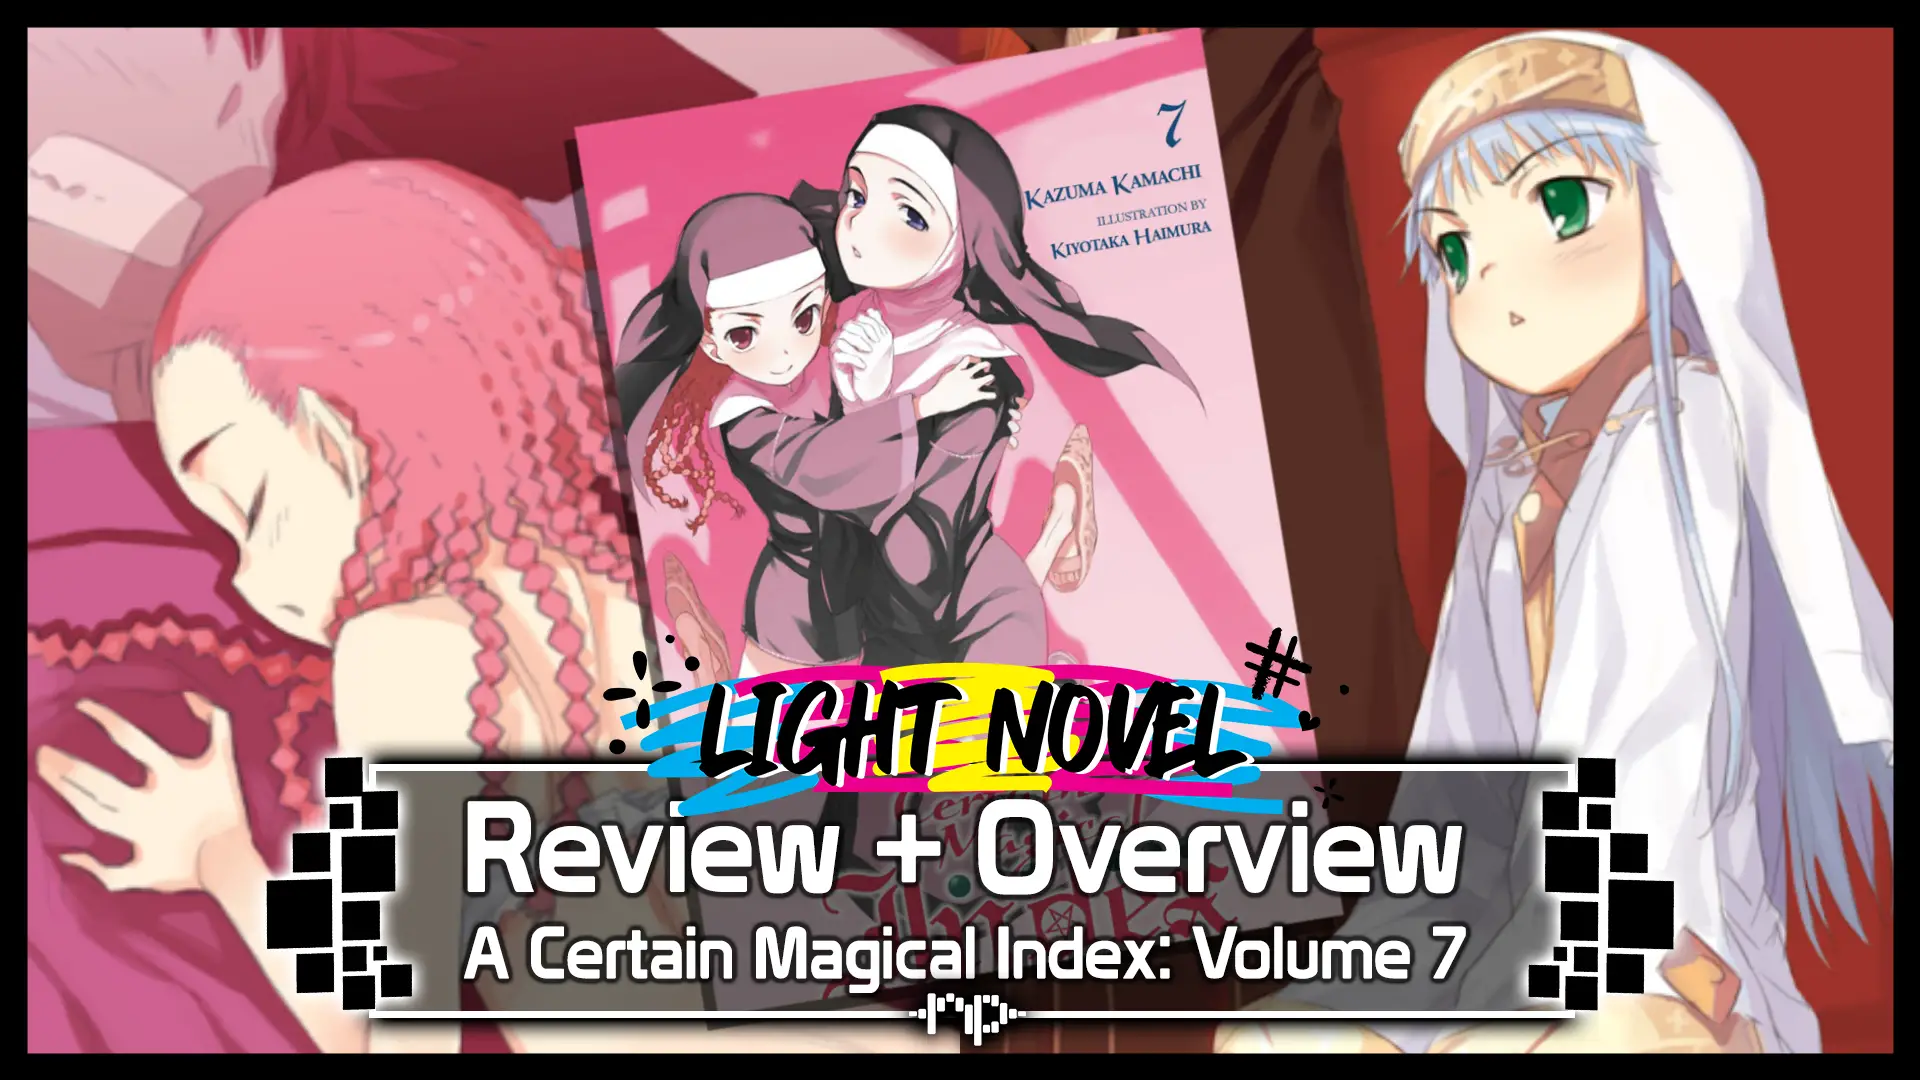 A Certain Magical Index Vol. 7 Review + Overview — Orsola Aquinas Rescue Arc — Roman Orthodoxy, Nun Army & Amateurism